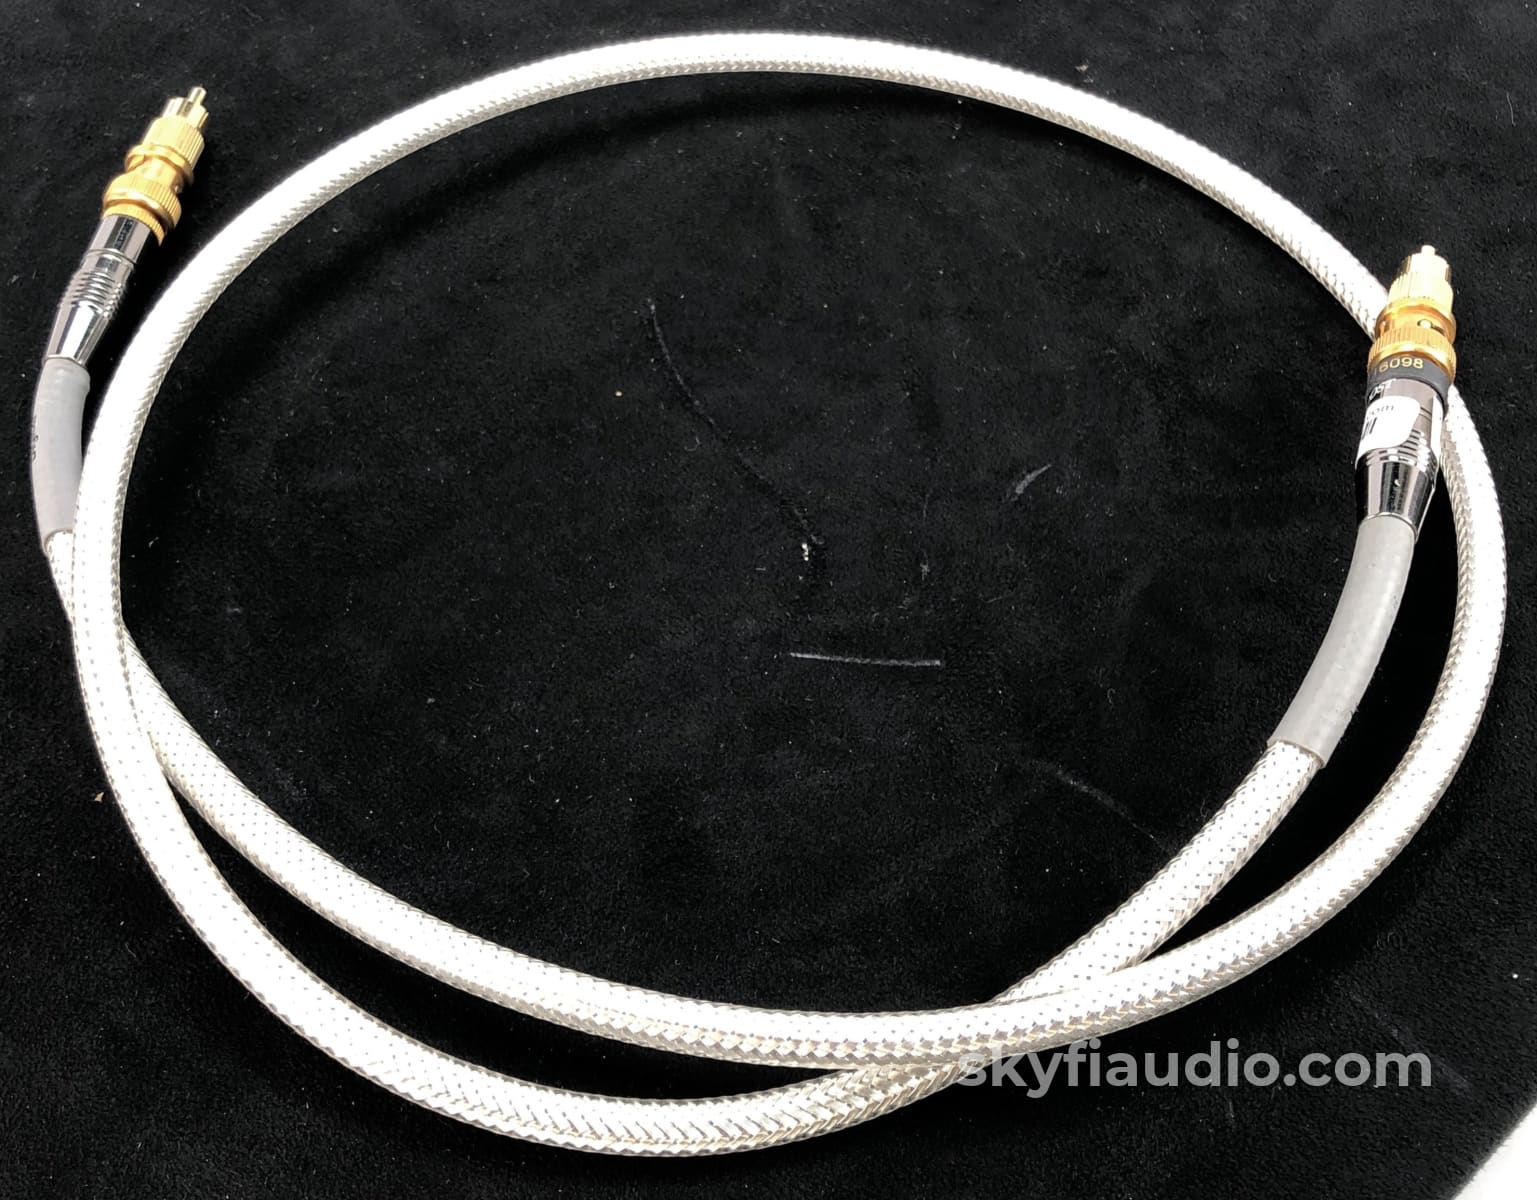 Nordost Valhalla Reference Digital Cable With Bnc To Rca Converter - 1M Cables